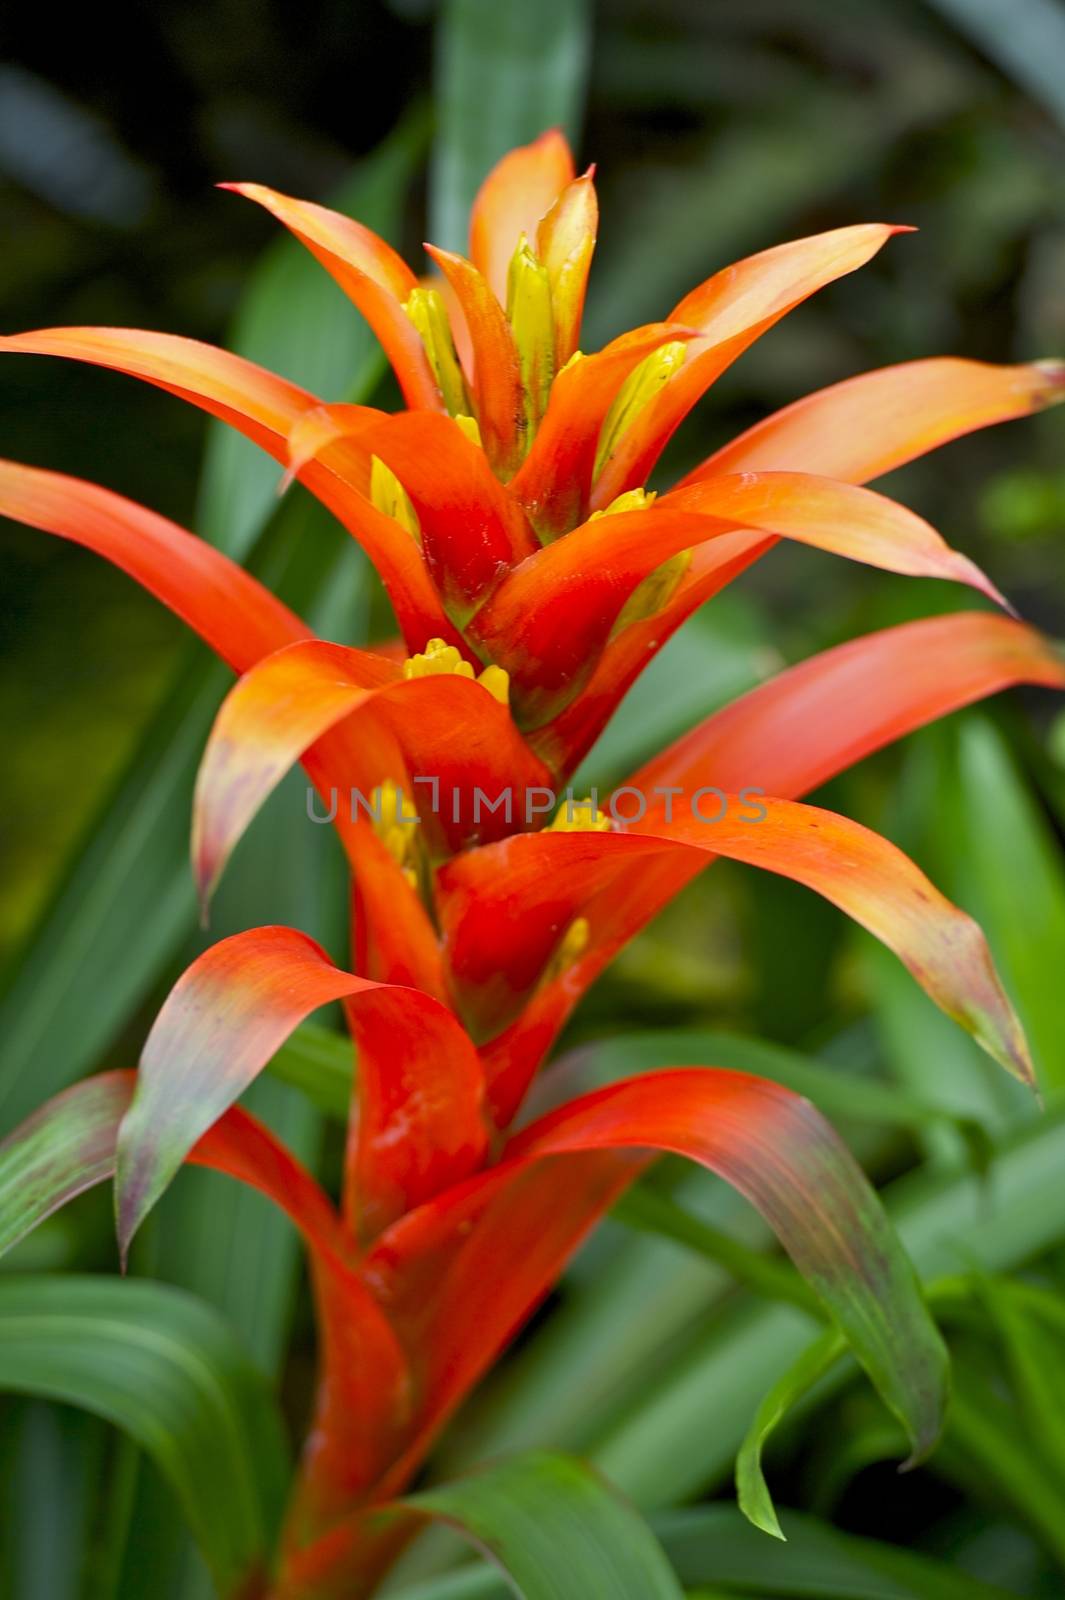 Red-Orange Tropical Flower. Rainforest Plants Photo Collection. Vertical Photography